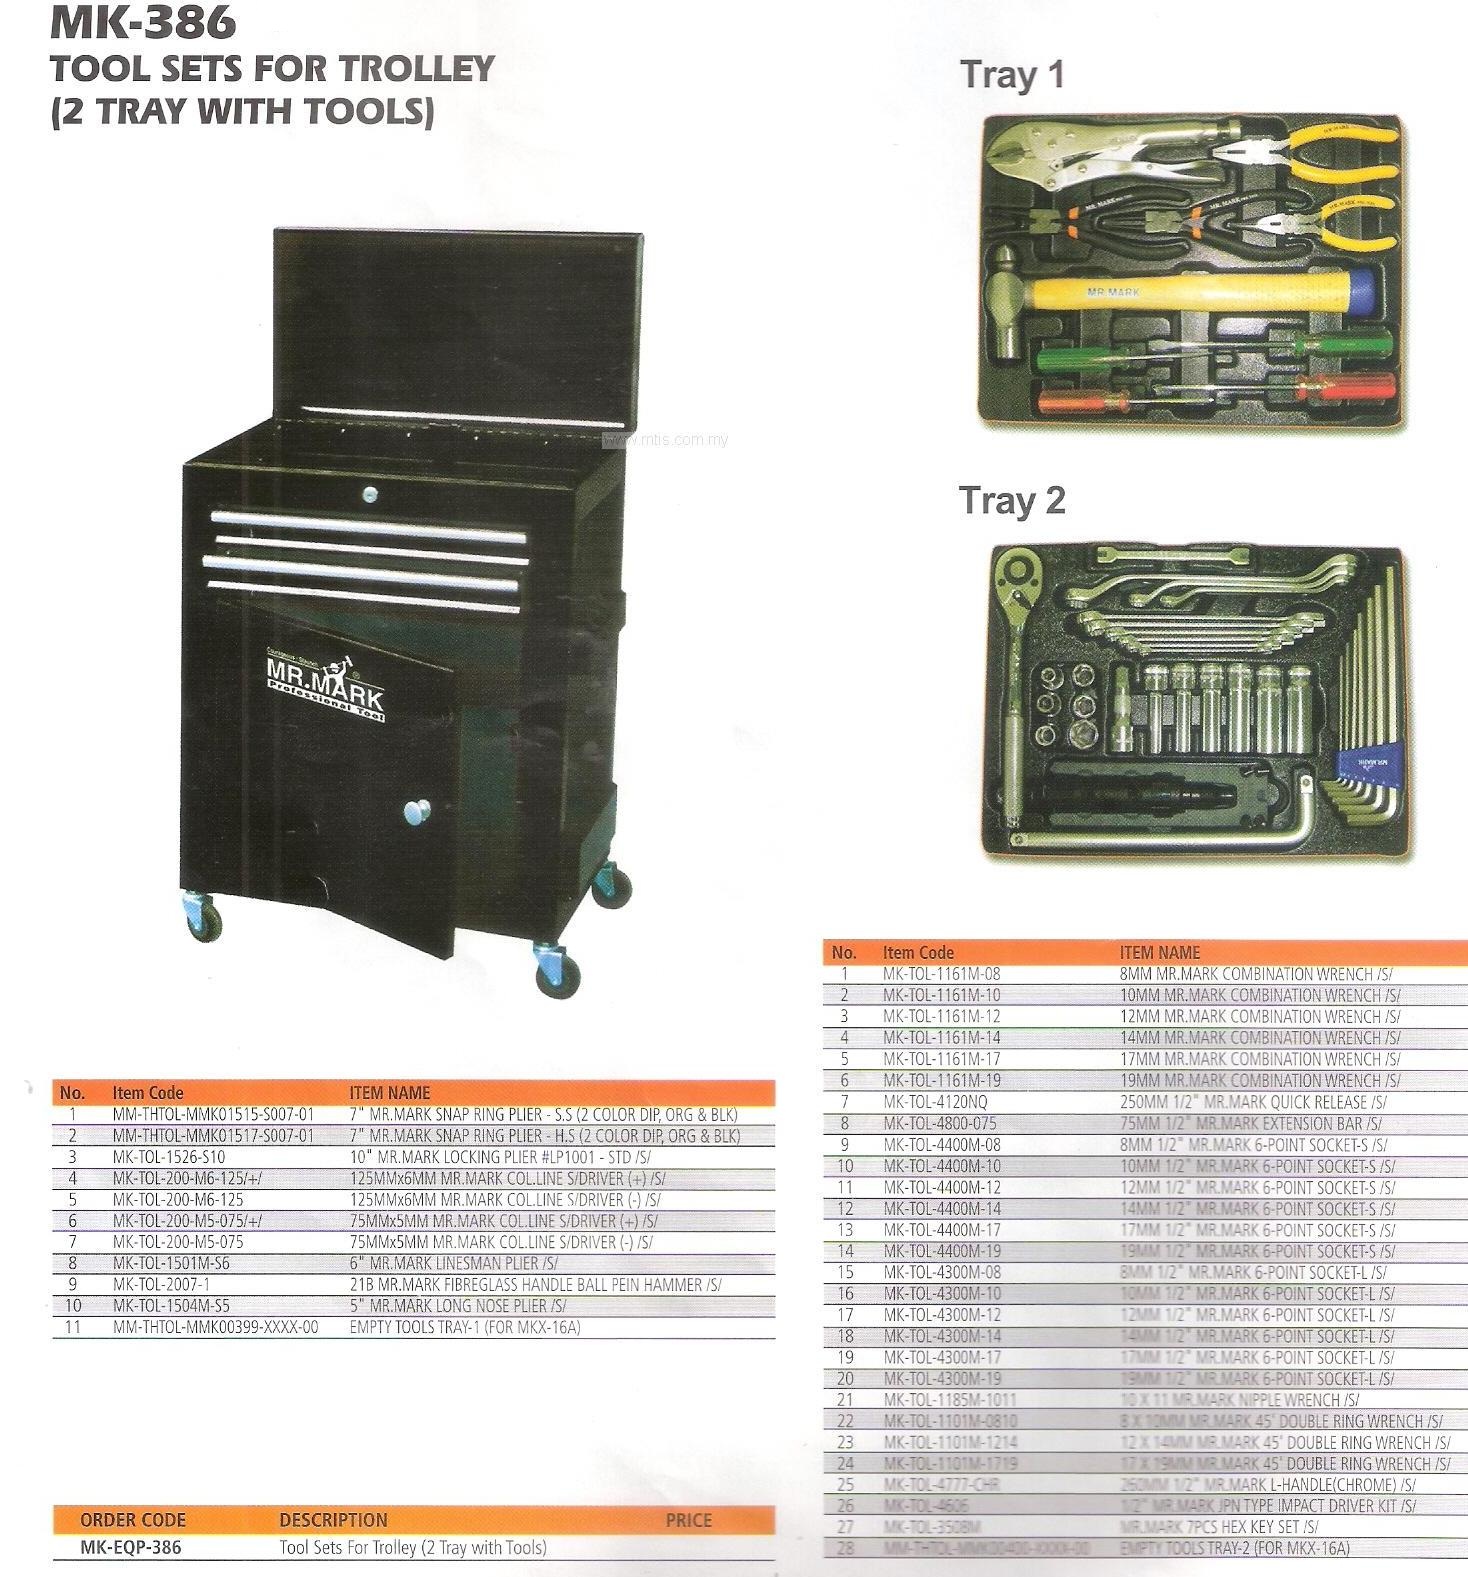 MR MARK MK-386 Tool Sets For Trolley 2 Tray with Tools